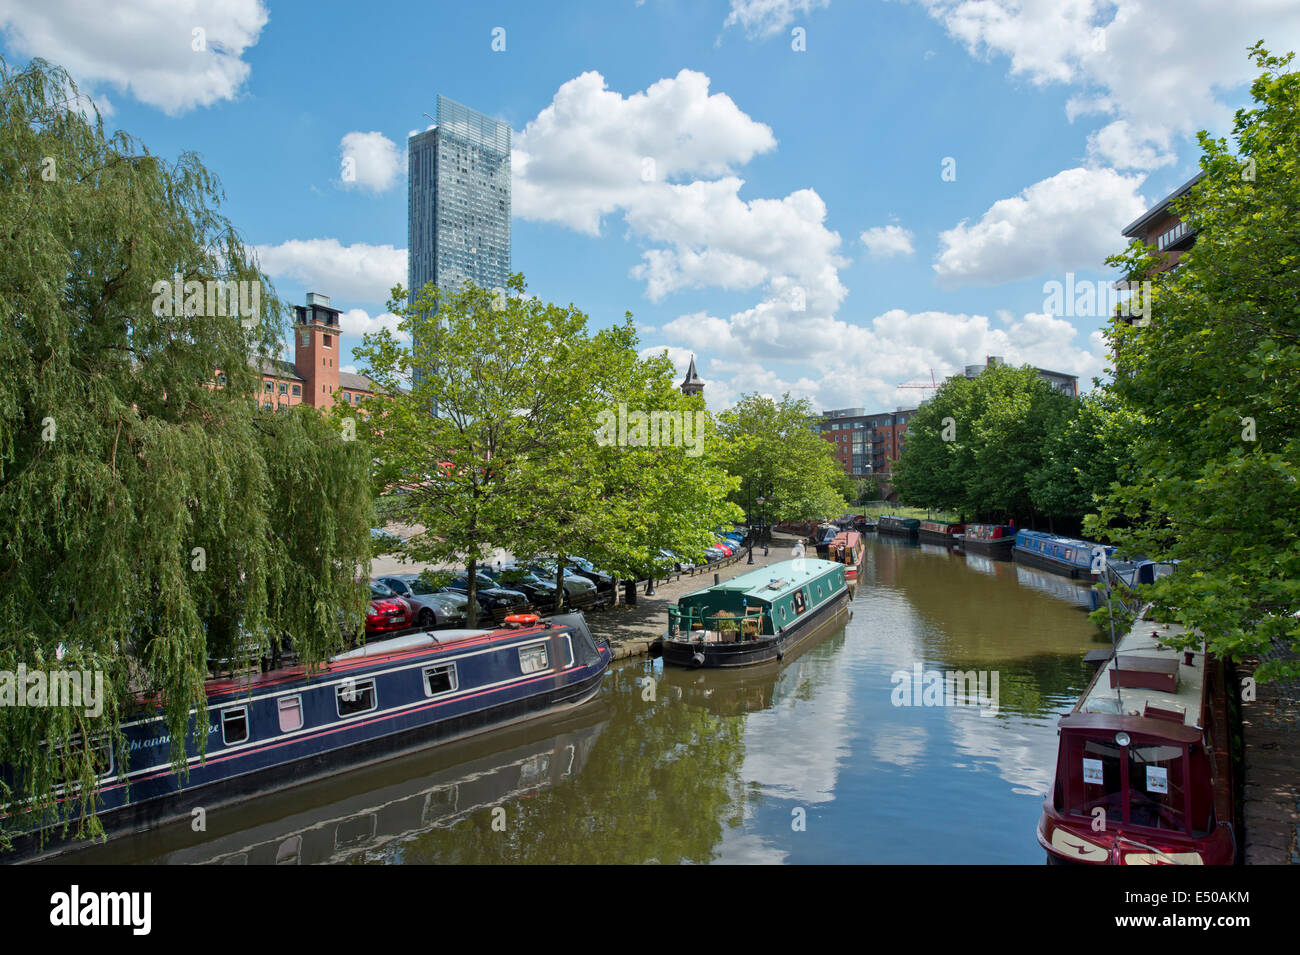 The Castlefield Urban Heritage Park and historic inner city canal conservation area including Beetham Tower in Manchester, UK. Stock Photo